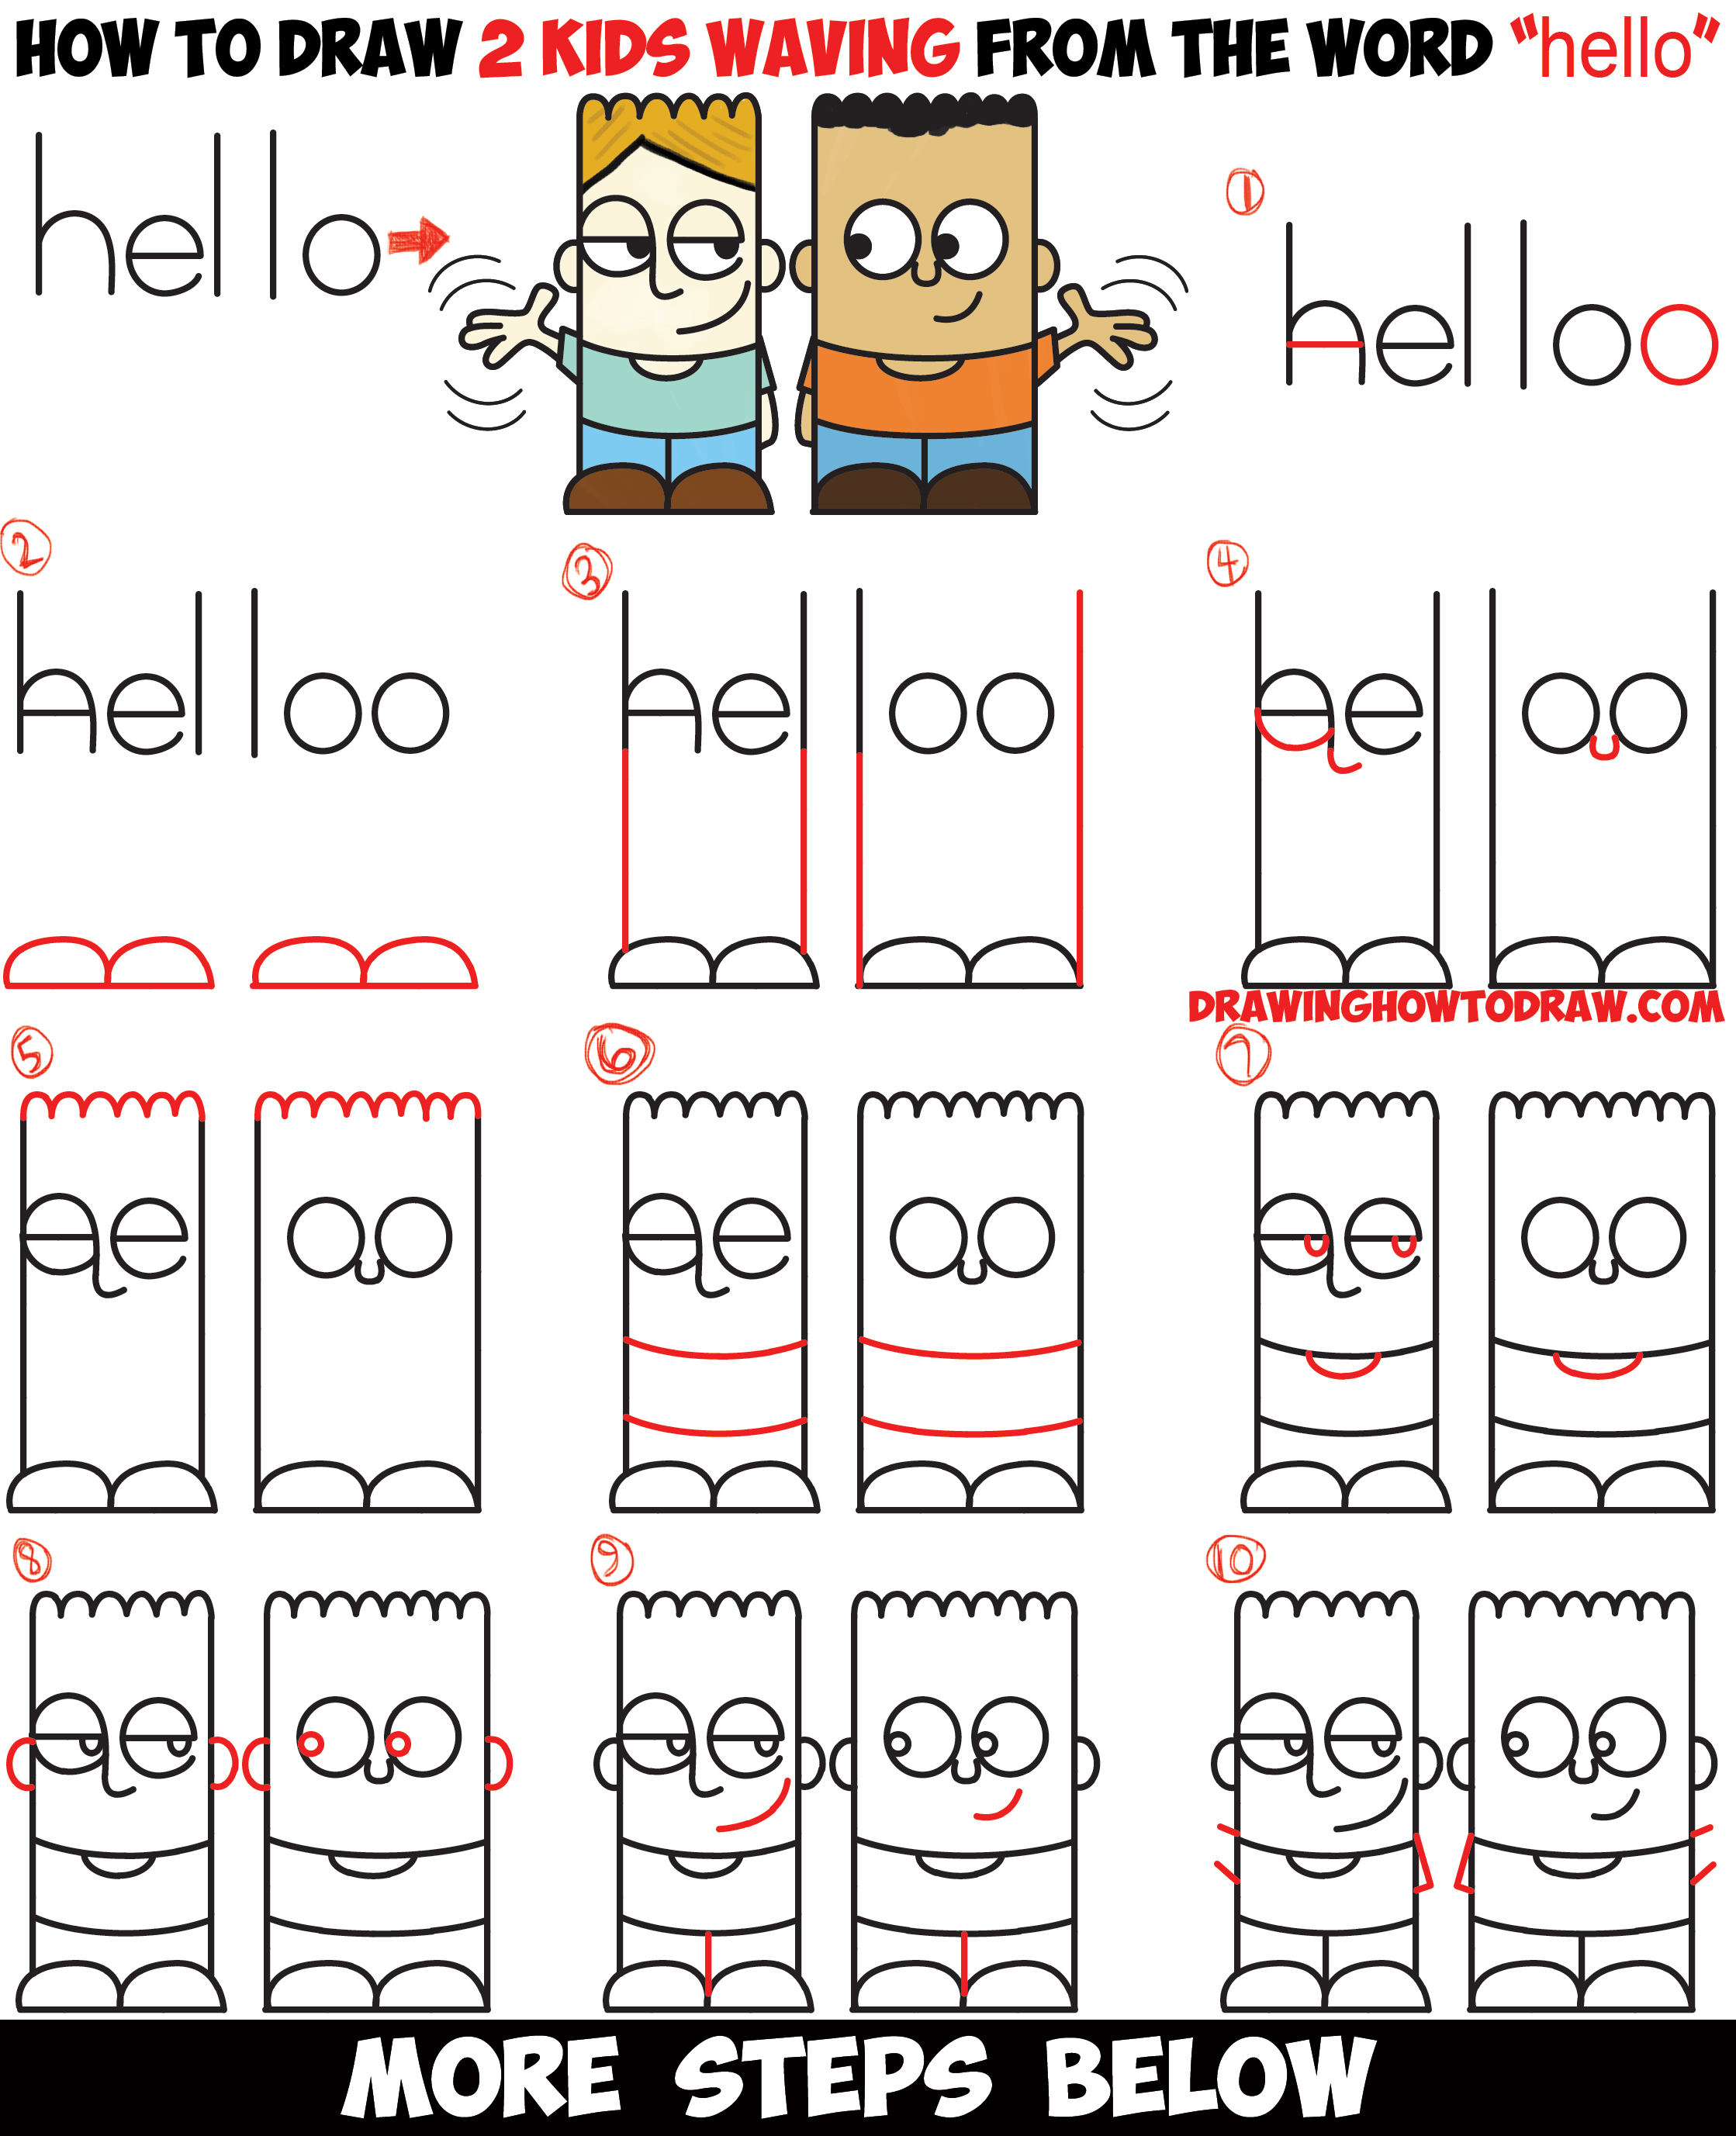 How to Draw 2 Cartoon Characters from the Word "hello